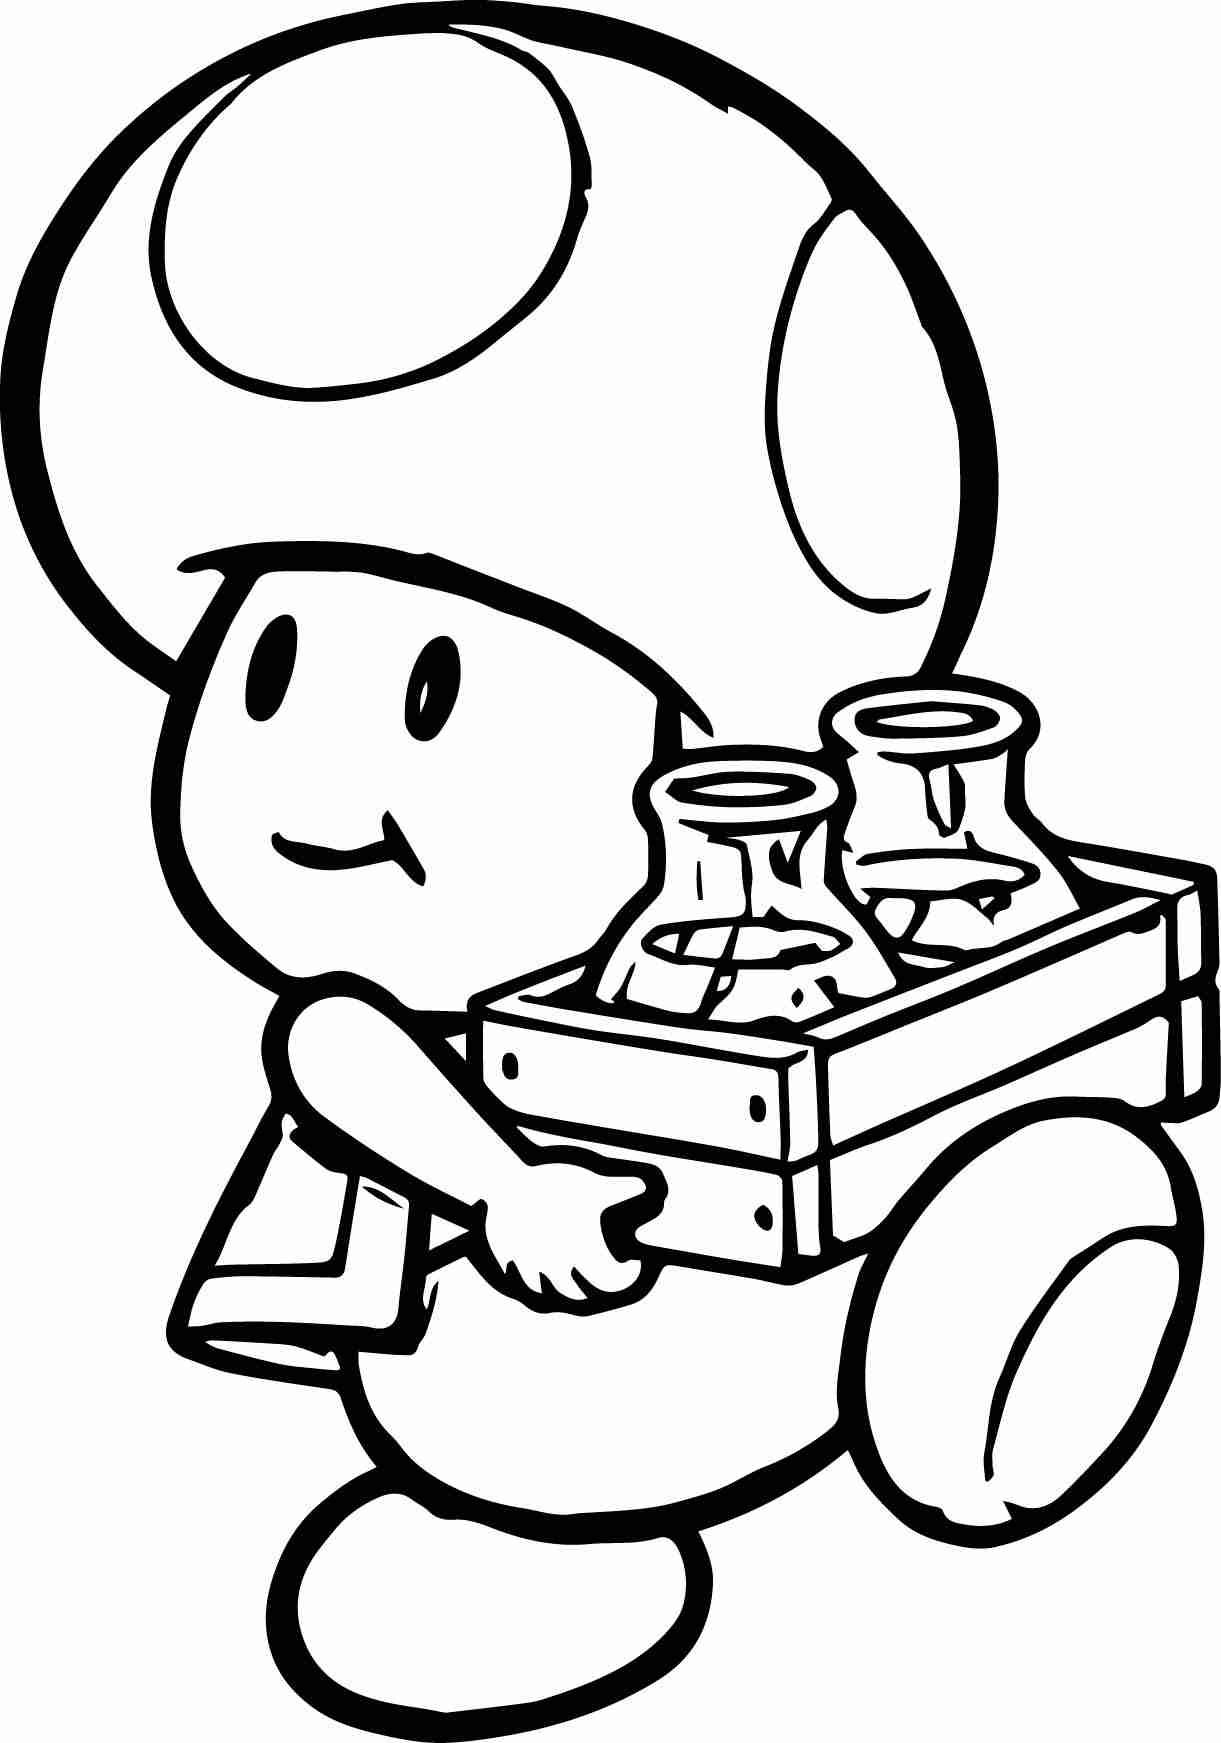 Nintendo Characters Coloring Pages at GetColorings.com ...